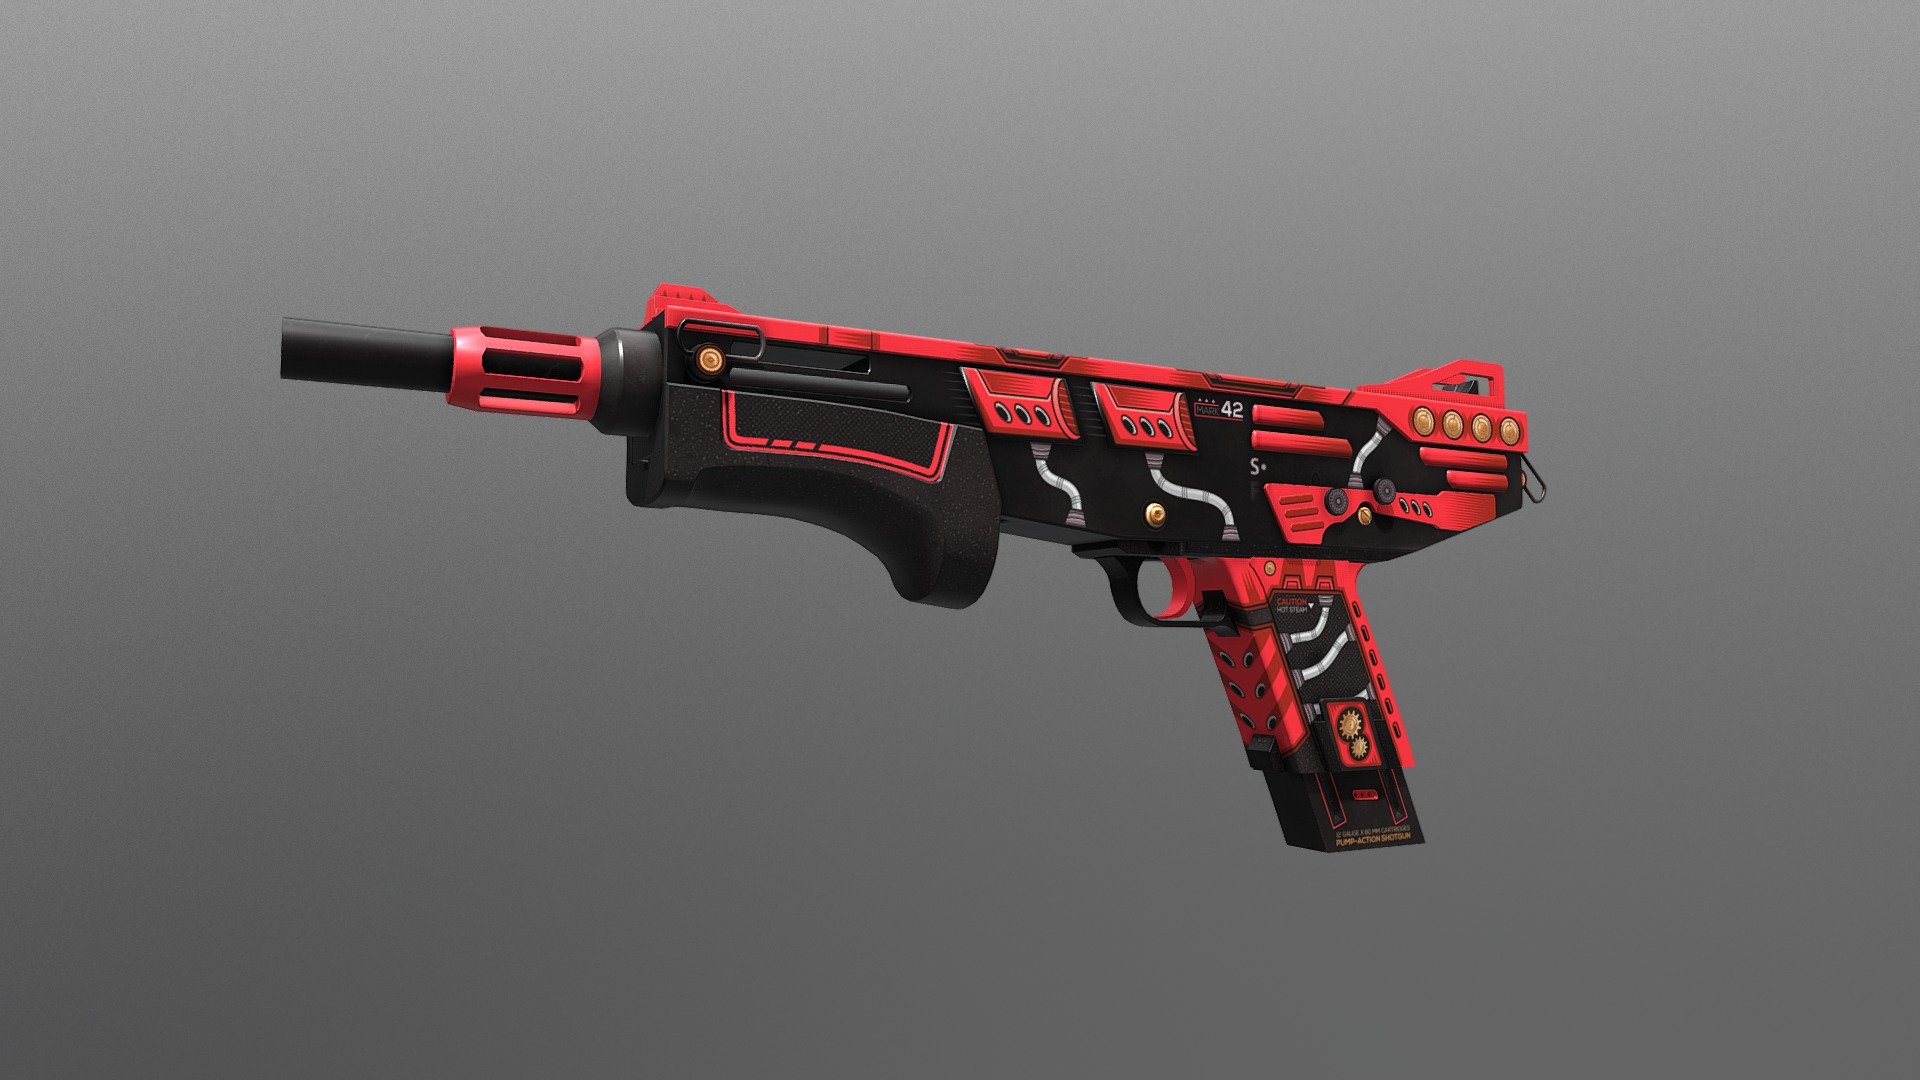 Red version of my Mag-7 Constructor. Vote if you want to see this skin in csgo.

http://steamcommunity.com/sharedfiles/filedetails/?id=1352756608 - Mag-7 | Constructor (Red) - 3D model by Hybra (@dragonx1196) 3d model